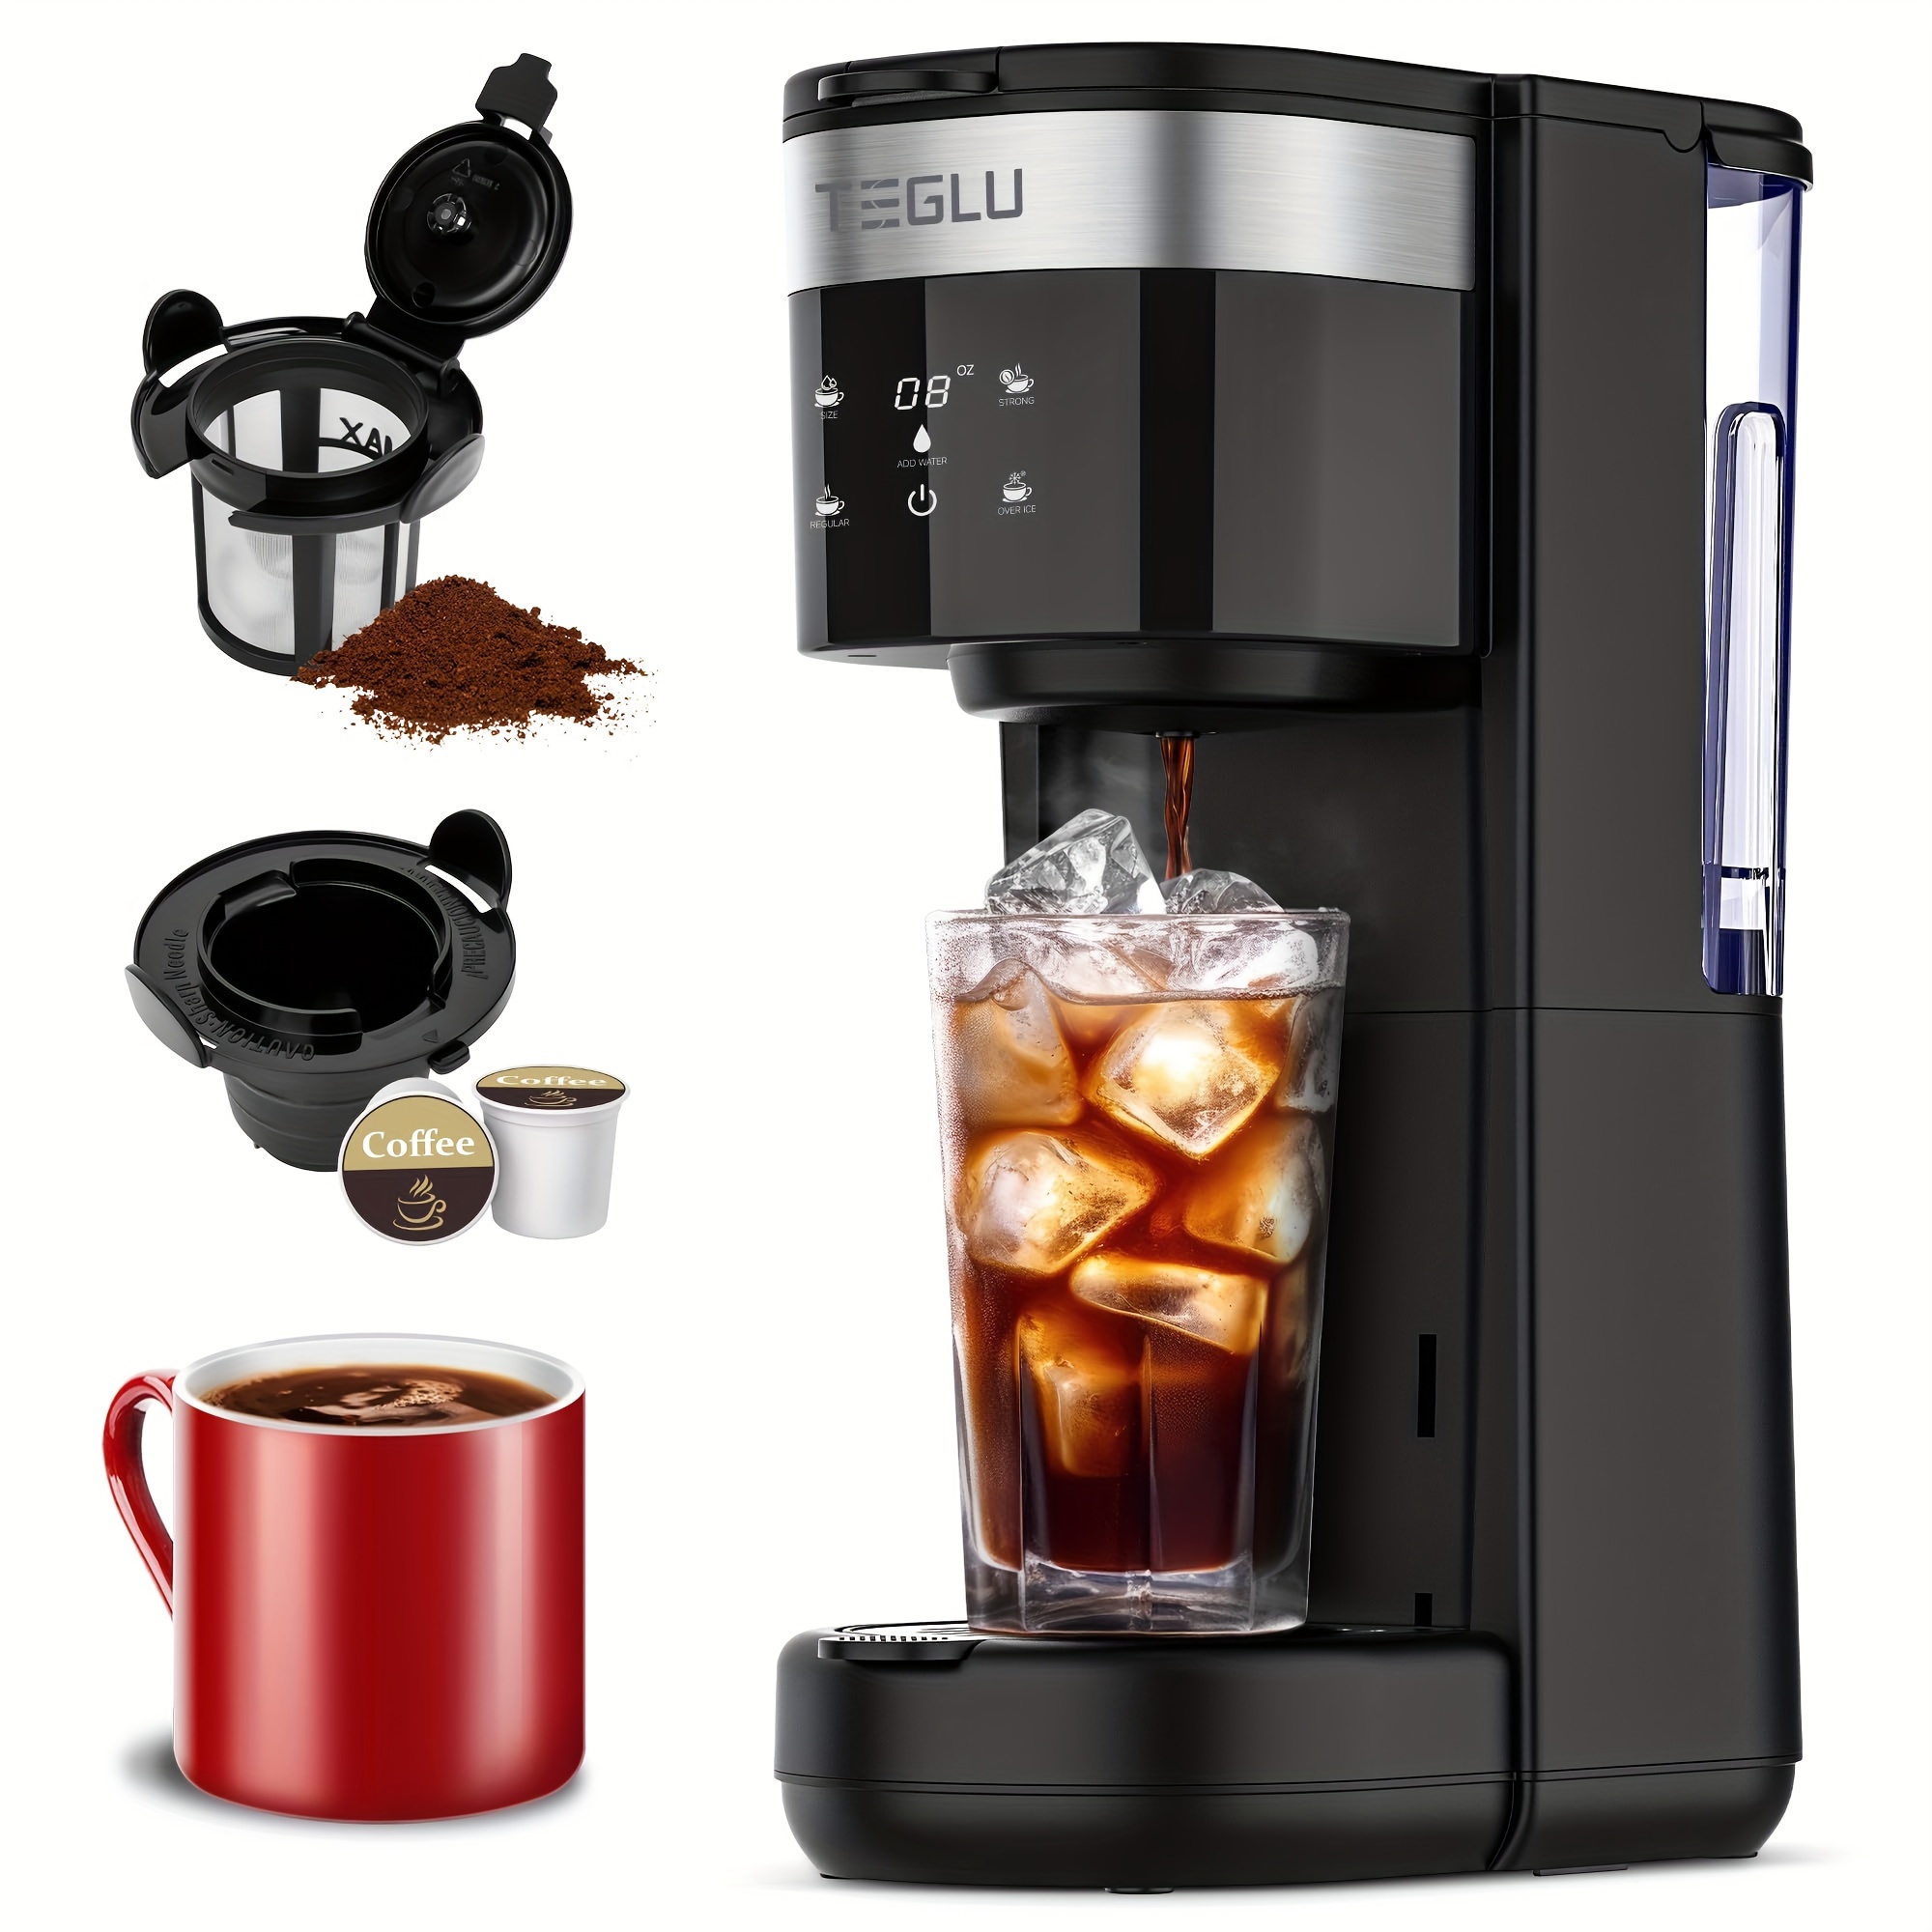 

Iced Coffee Maker, Single Cup Hot And Cold Coffee Maker For K-cups And Ground Coffee, Rich And Fragrant, Iced Coffee Maker With 30 Oz. Removable Water Reservoir, 6 To 14 Oz. Cup Sizes, Self-cleaning